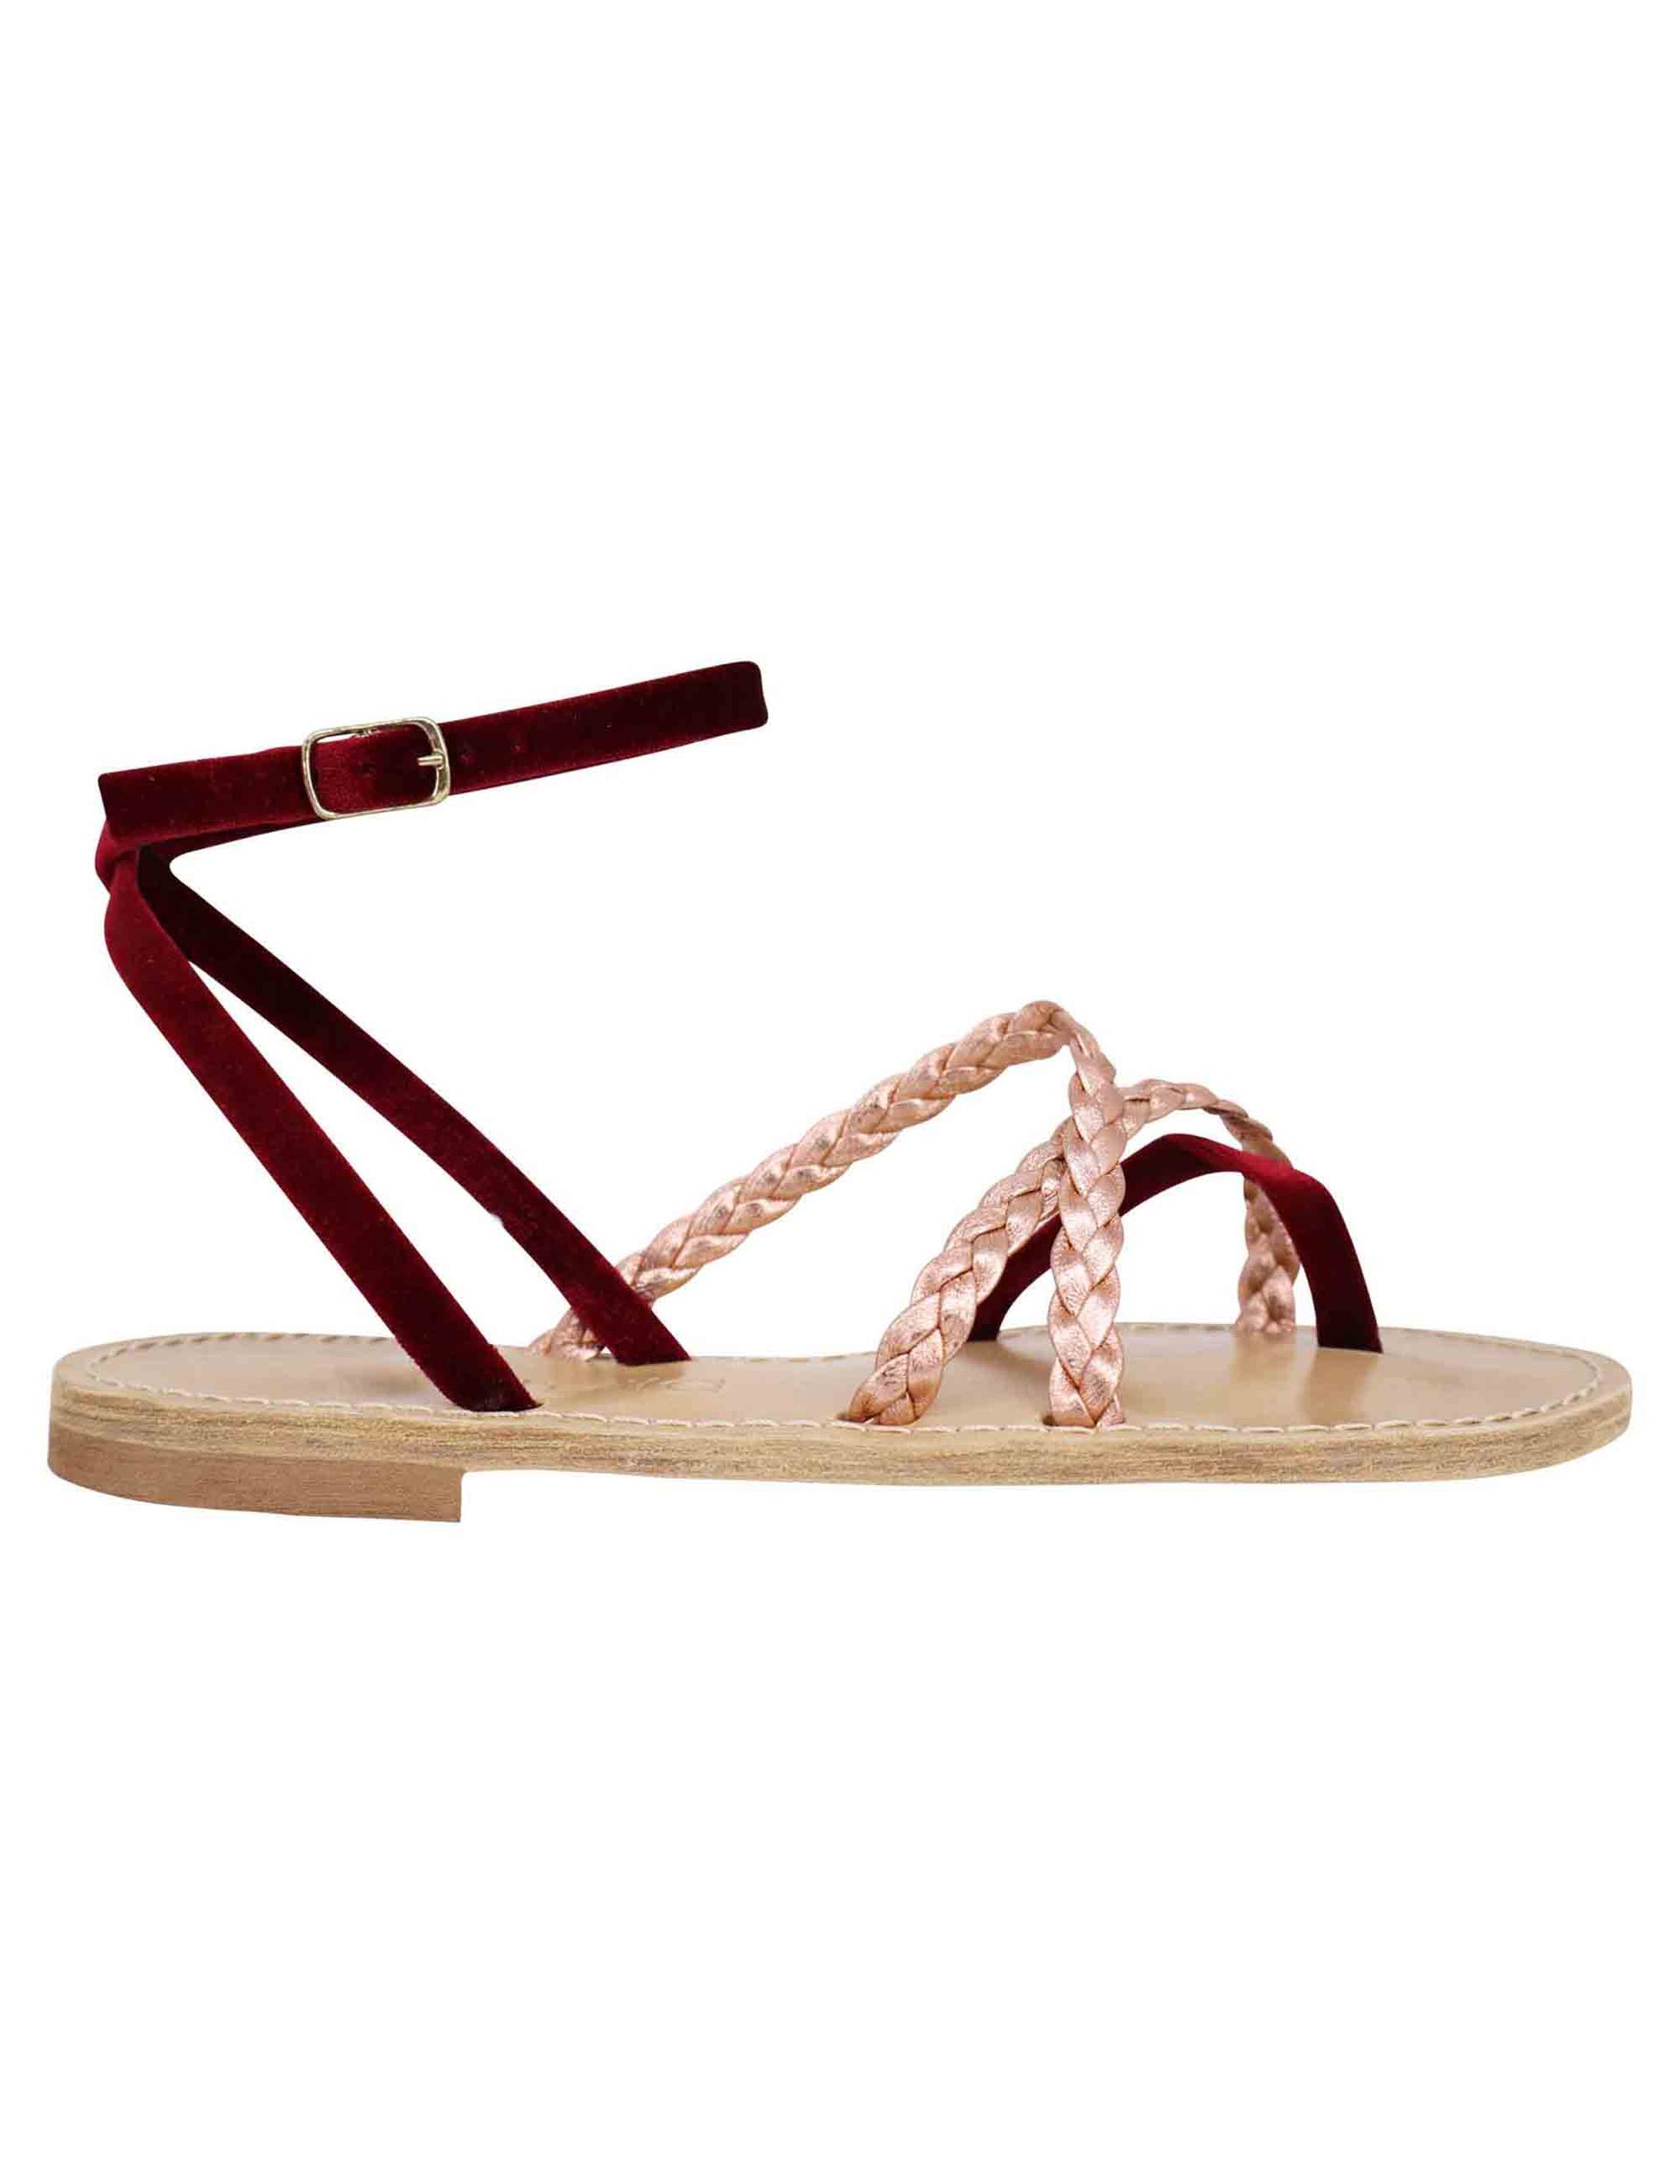 Women's flat sandals in gold laminated nappa leather and chenille with ankle strap